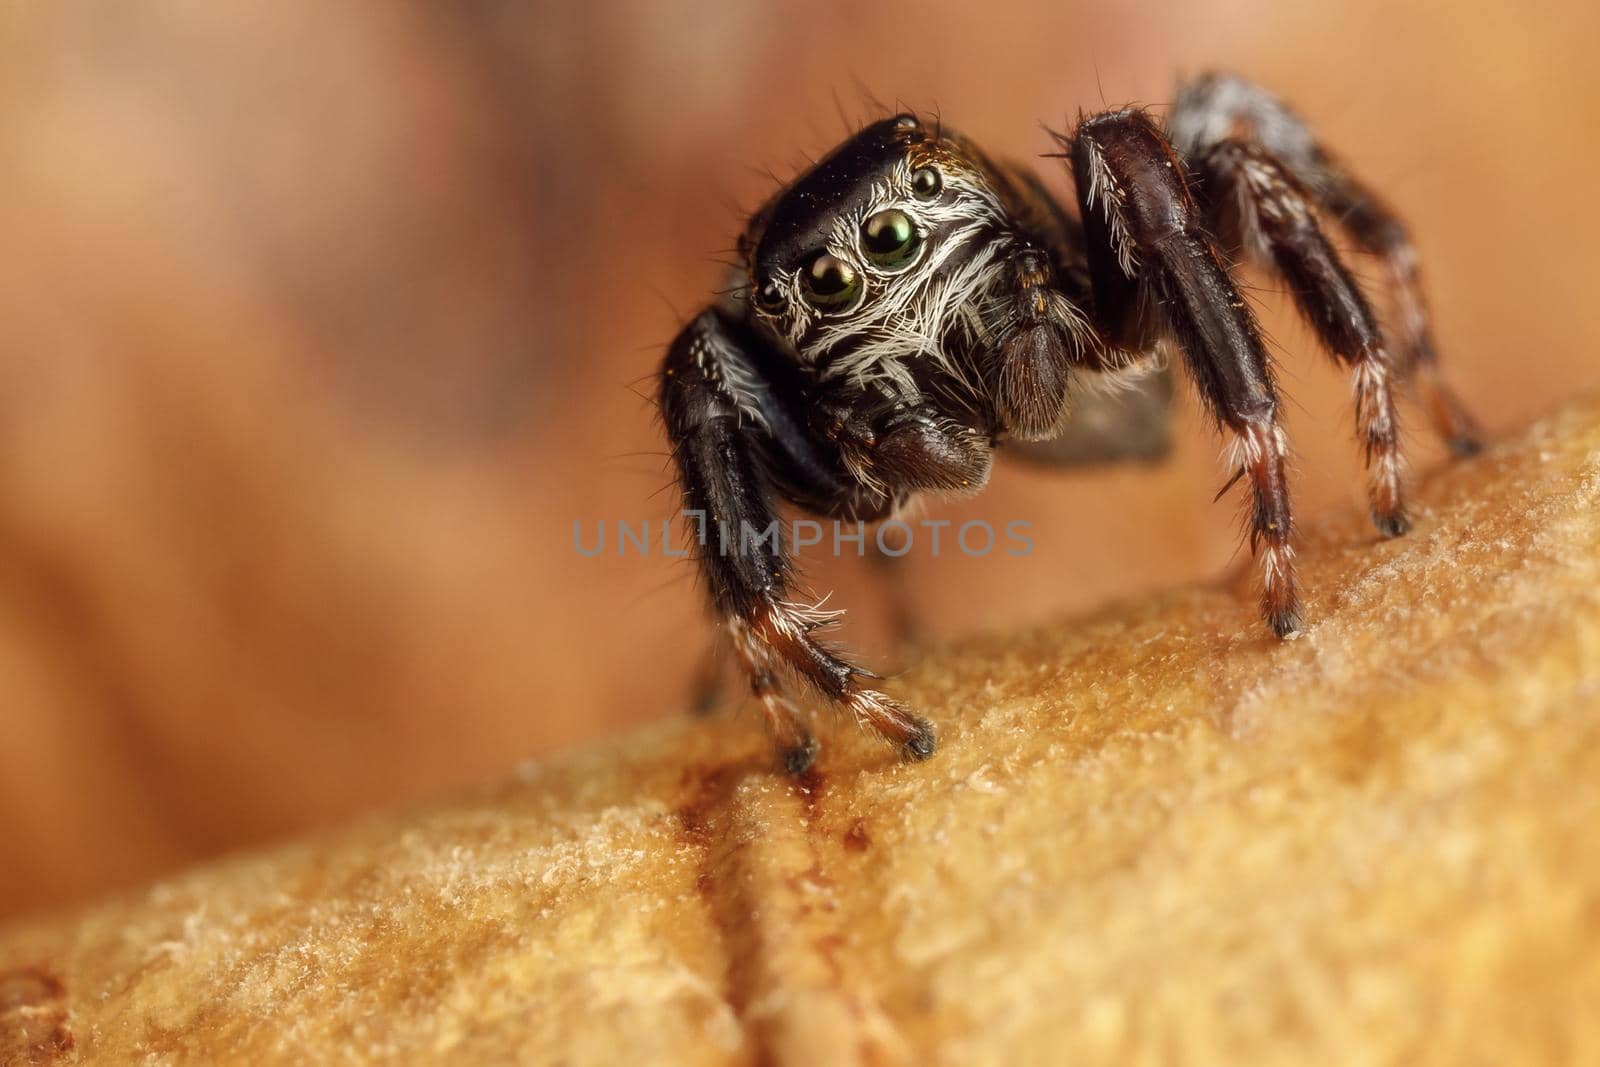 Amazing jumping spider action on a birch peel. Beautiful nature scene with hairy arachnid who has big shining eyes